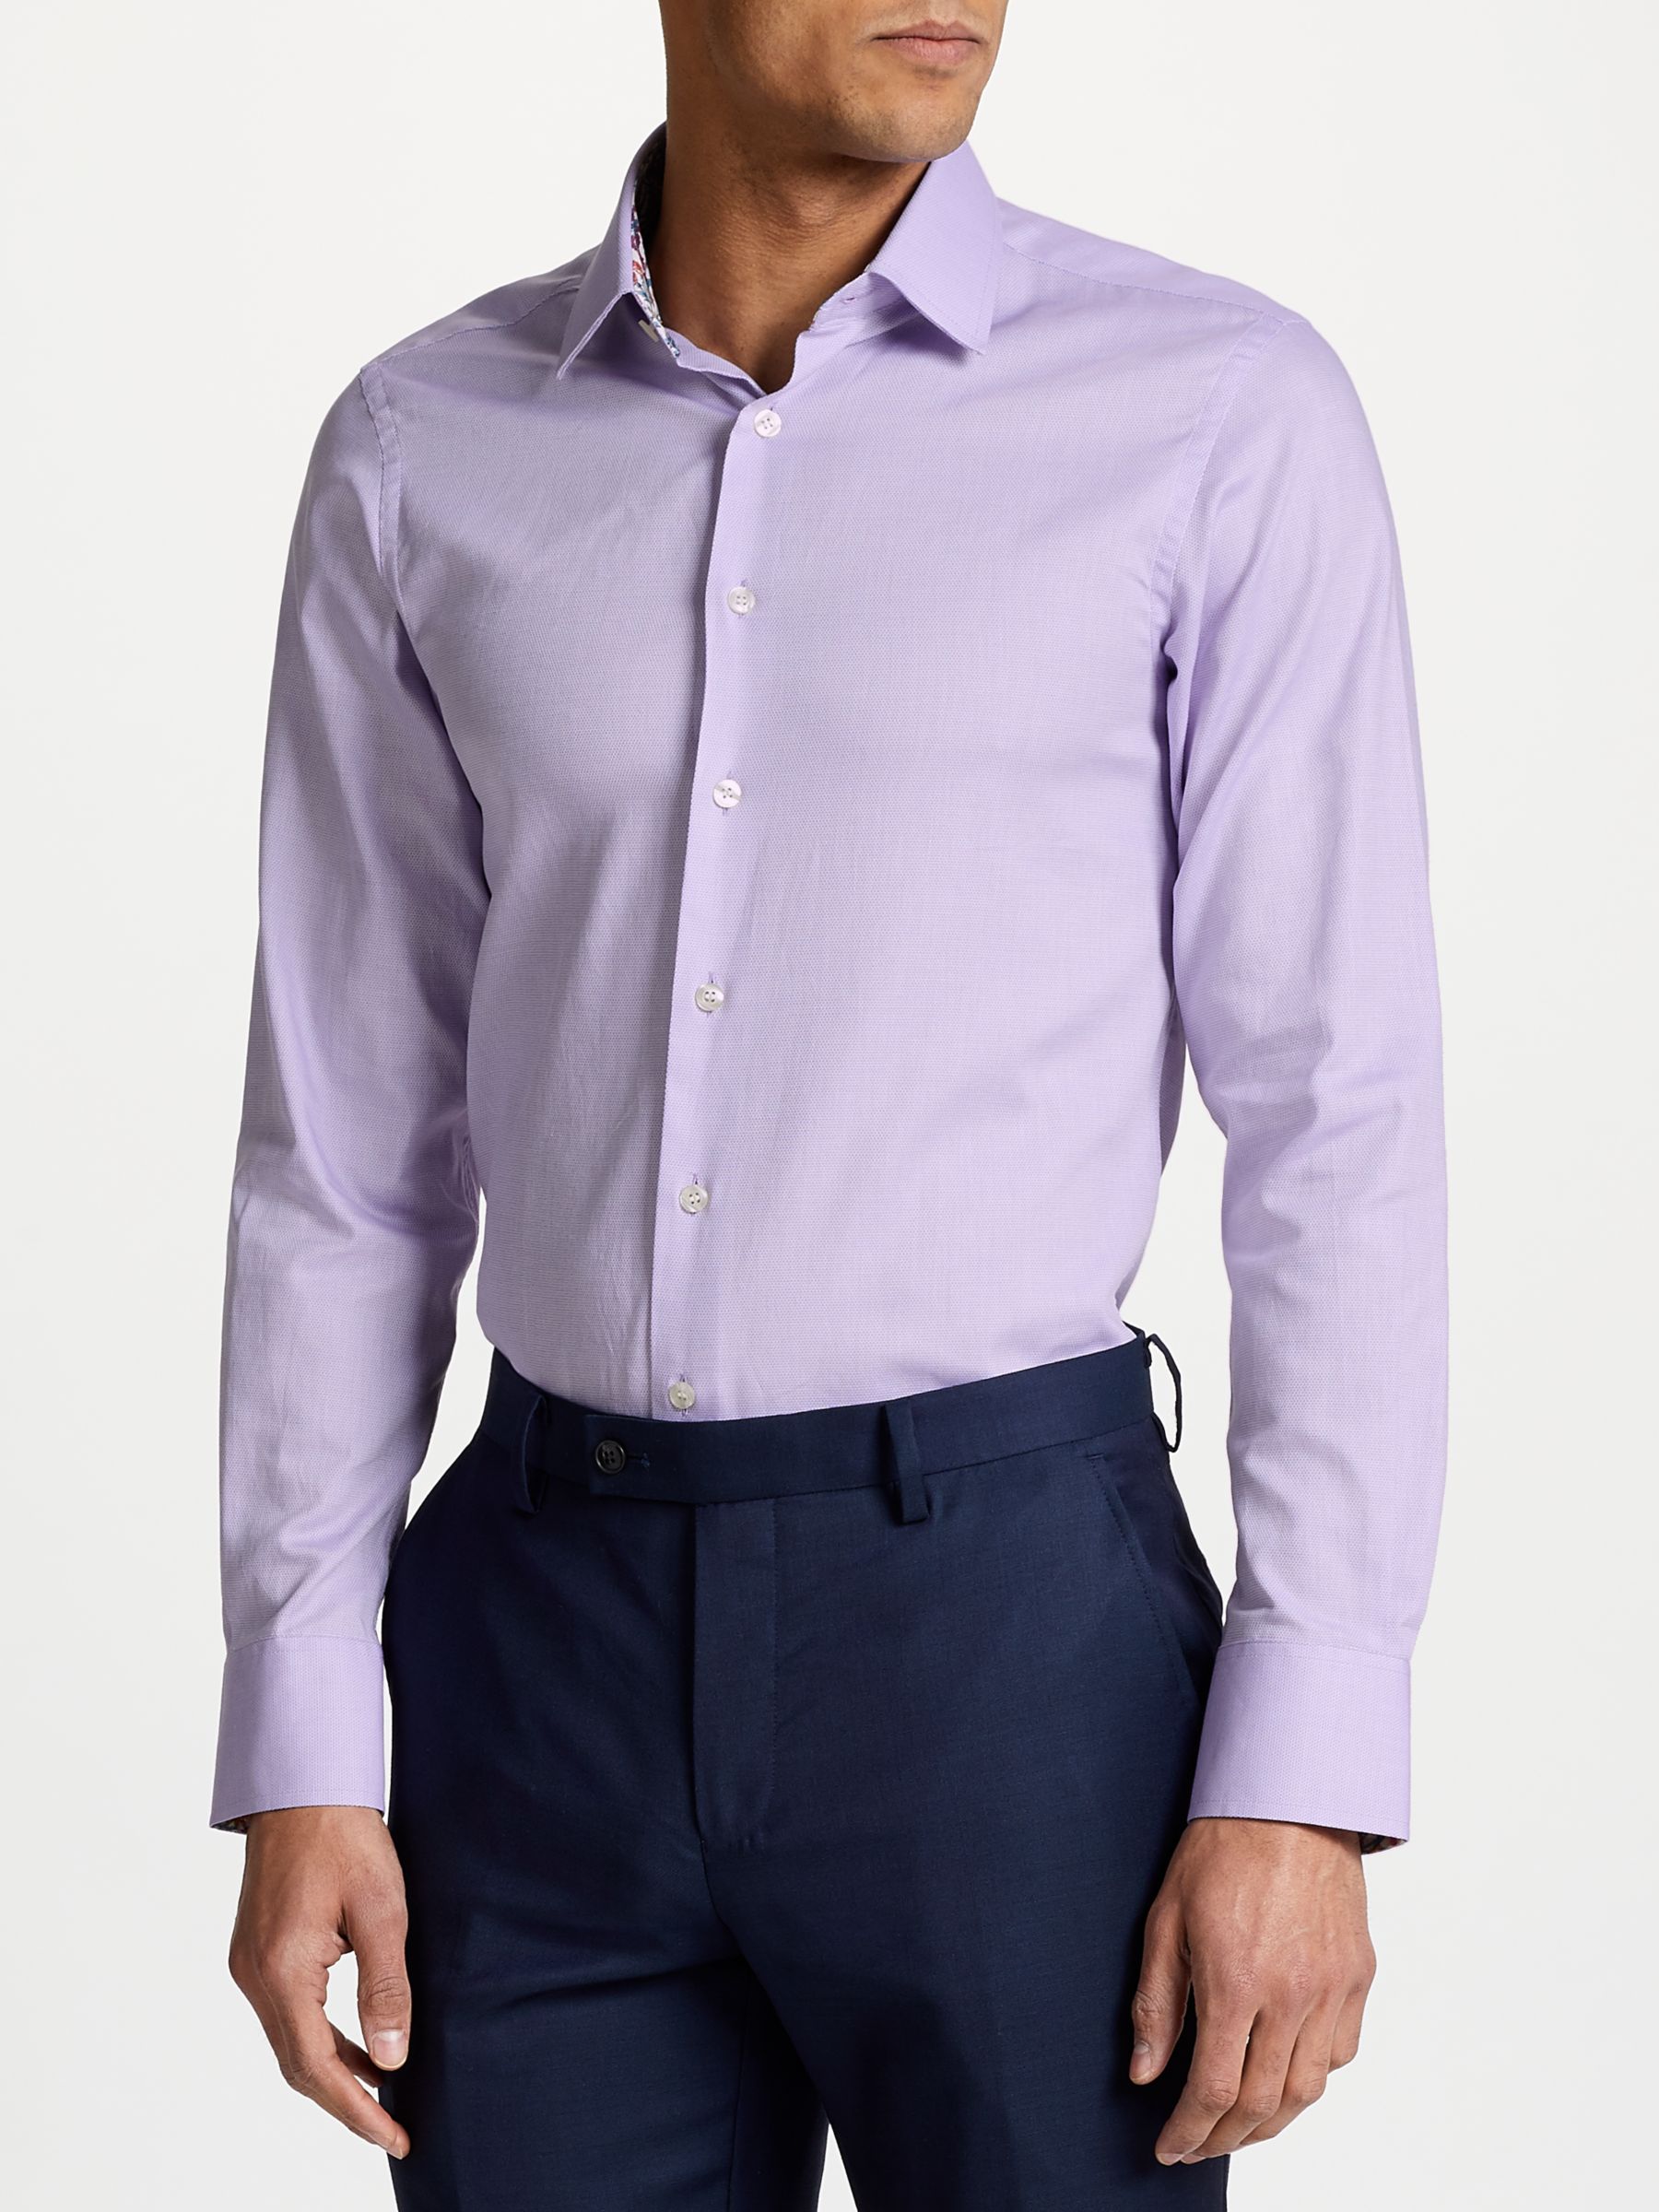 Smyth & Gibson Circle Weave 100s Cotton Slim Fit Shirt, Lilac, 16.5